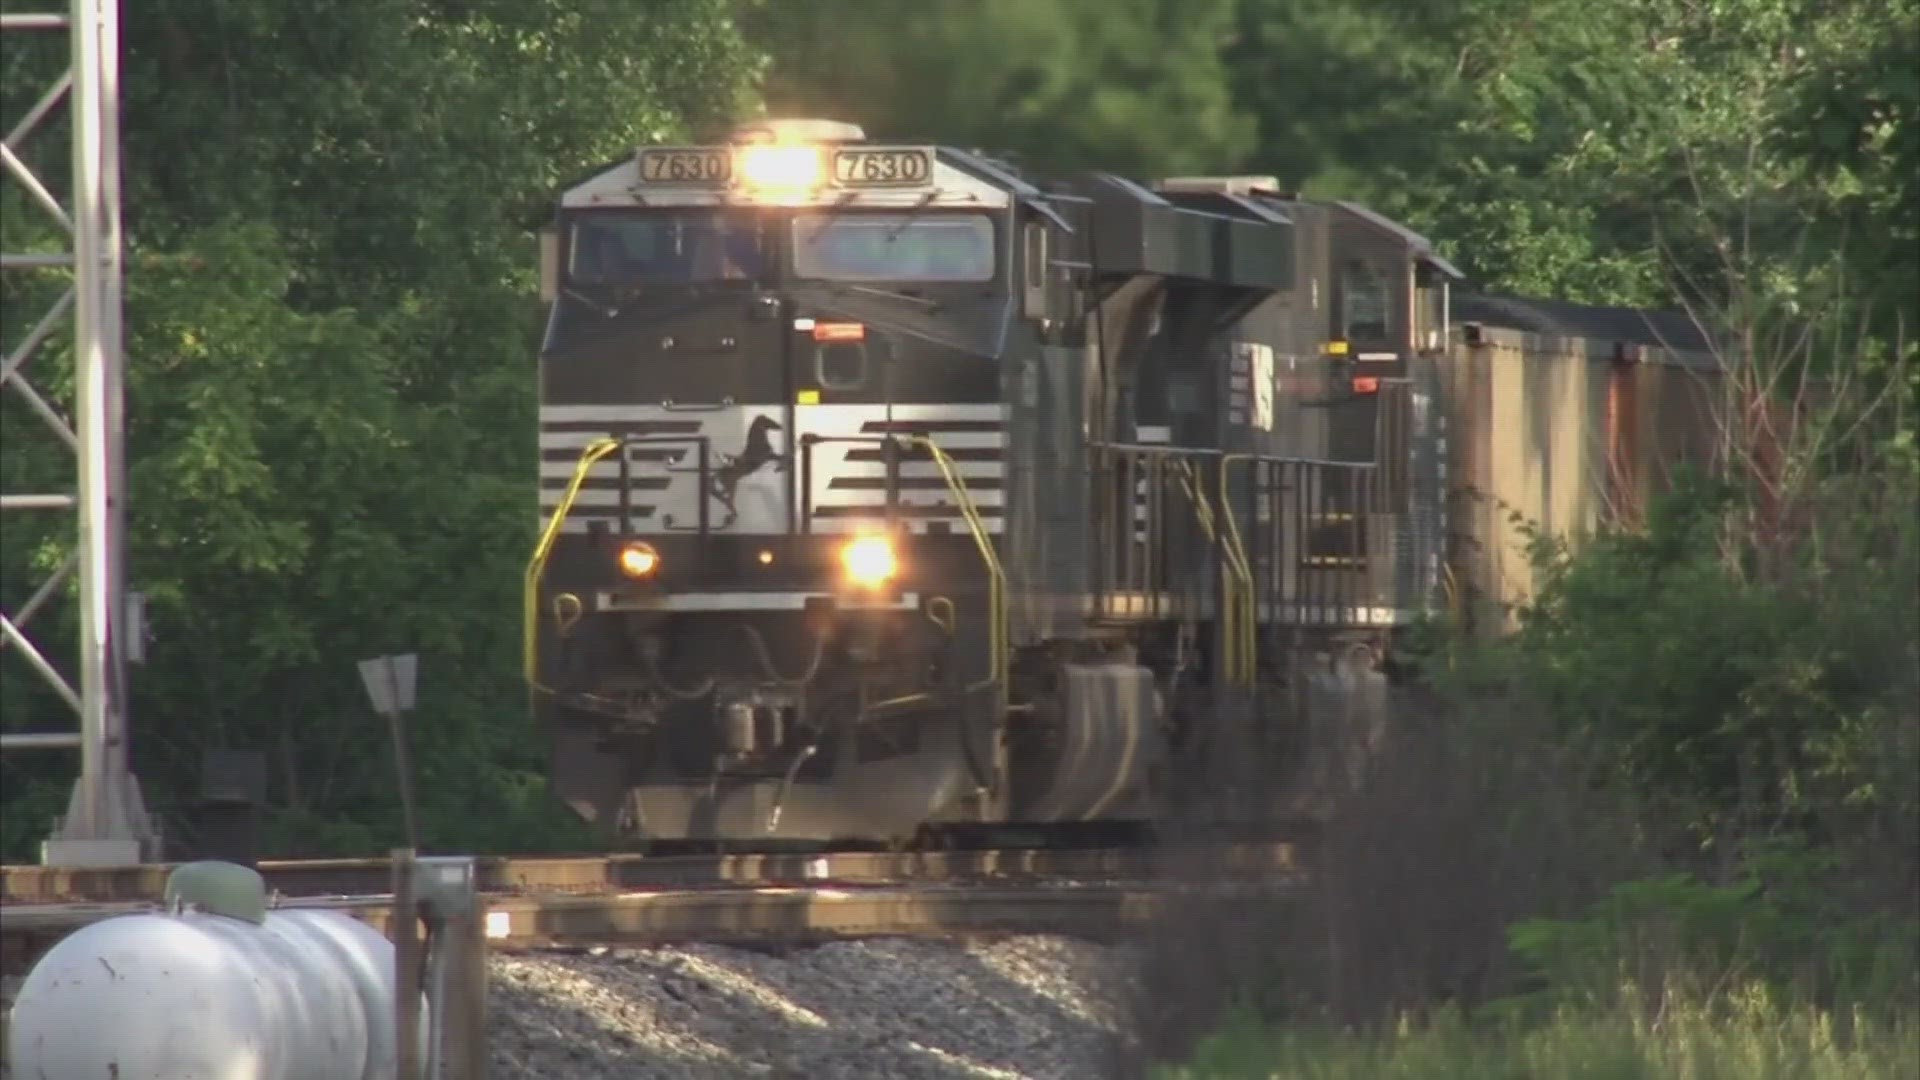 Railroad safety has become a concern nationwide since a Norfolk Southern train derailed in Ohio in February and caught fire after spilling hazardous chemicals.